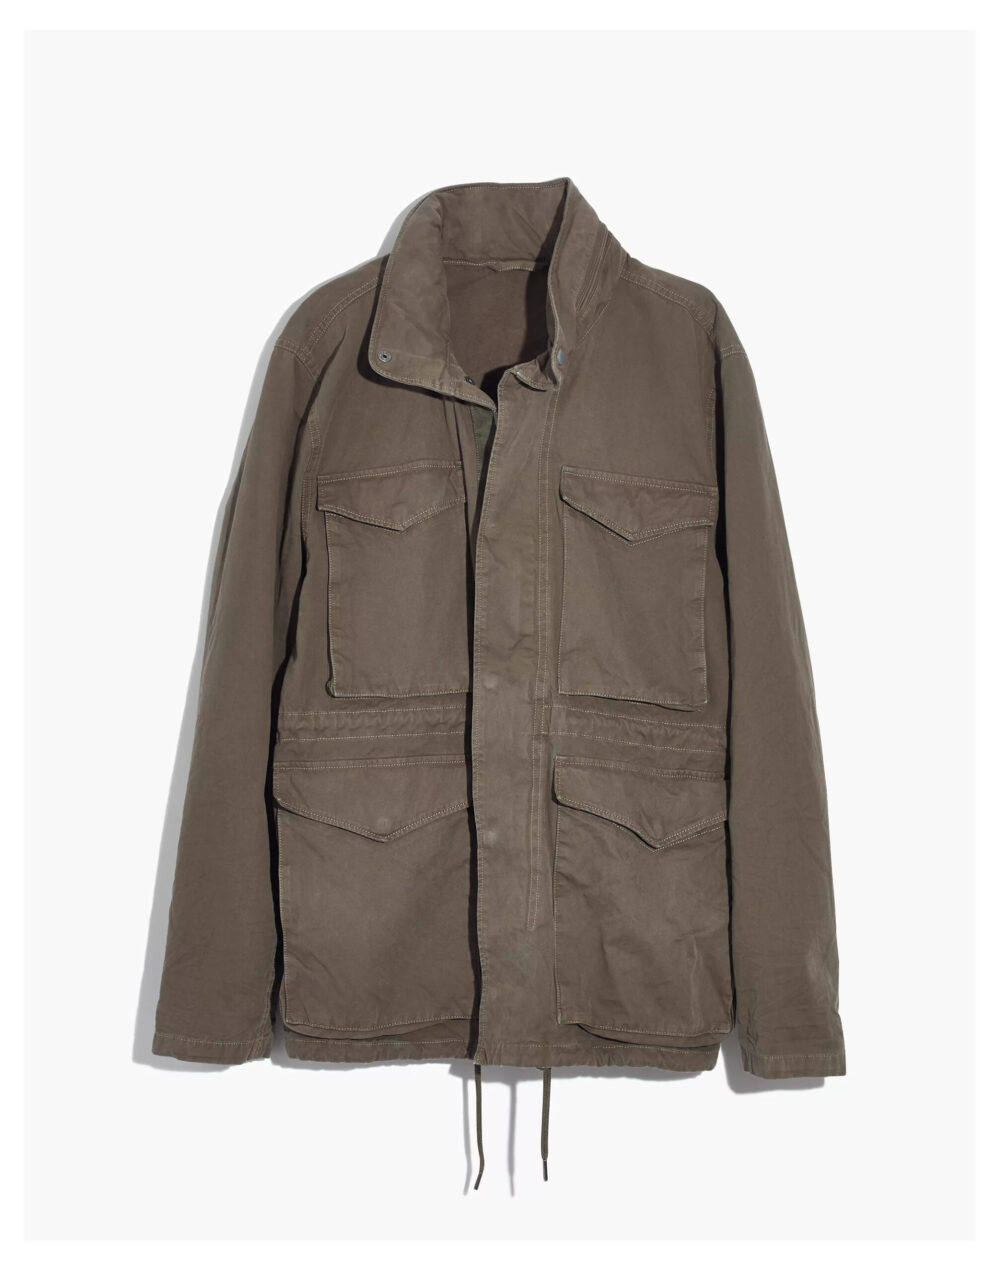 Military Jackets: A Guide To The Best Styles (2021 updates) · Effortless  Gent